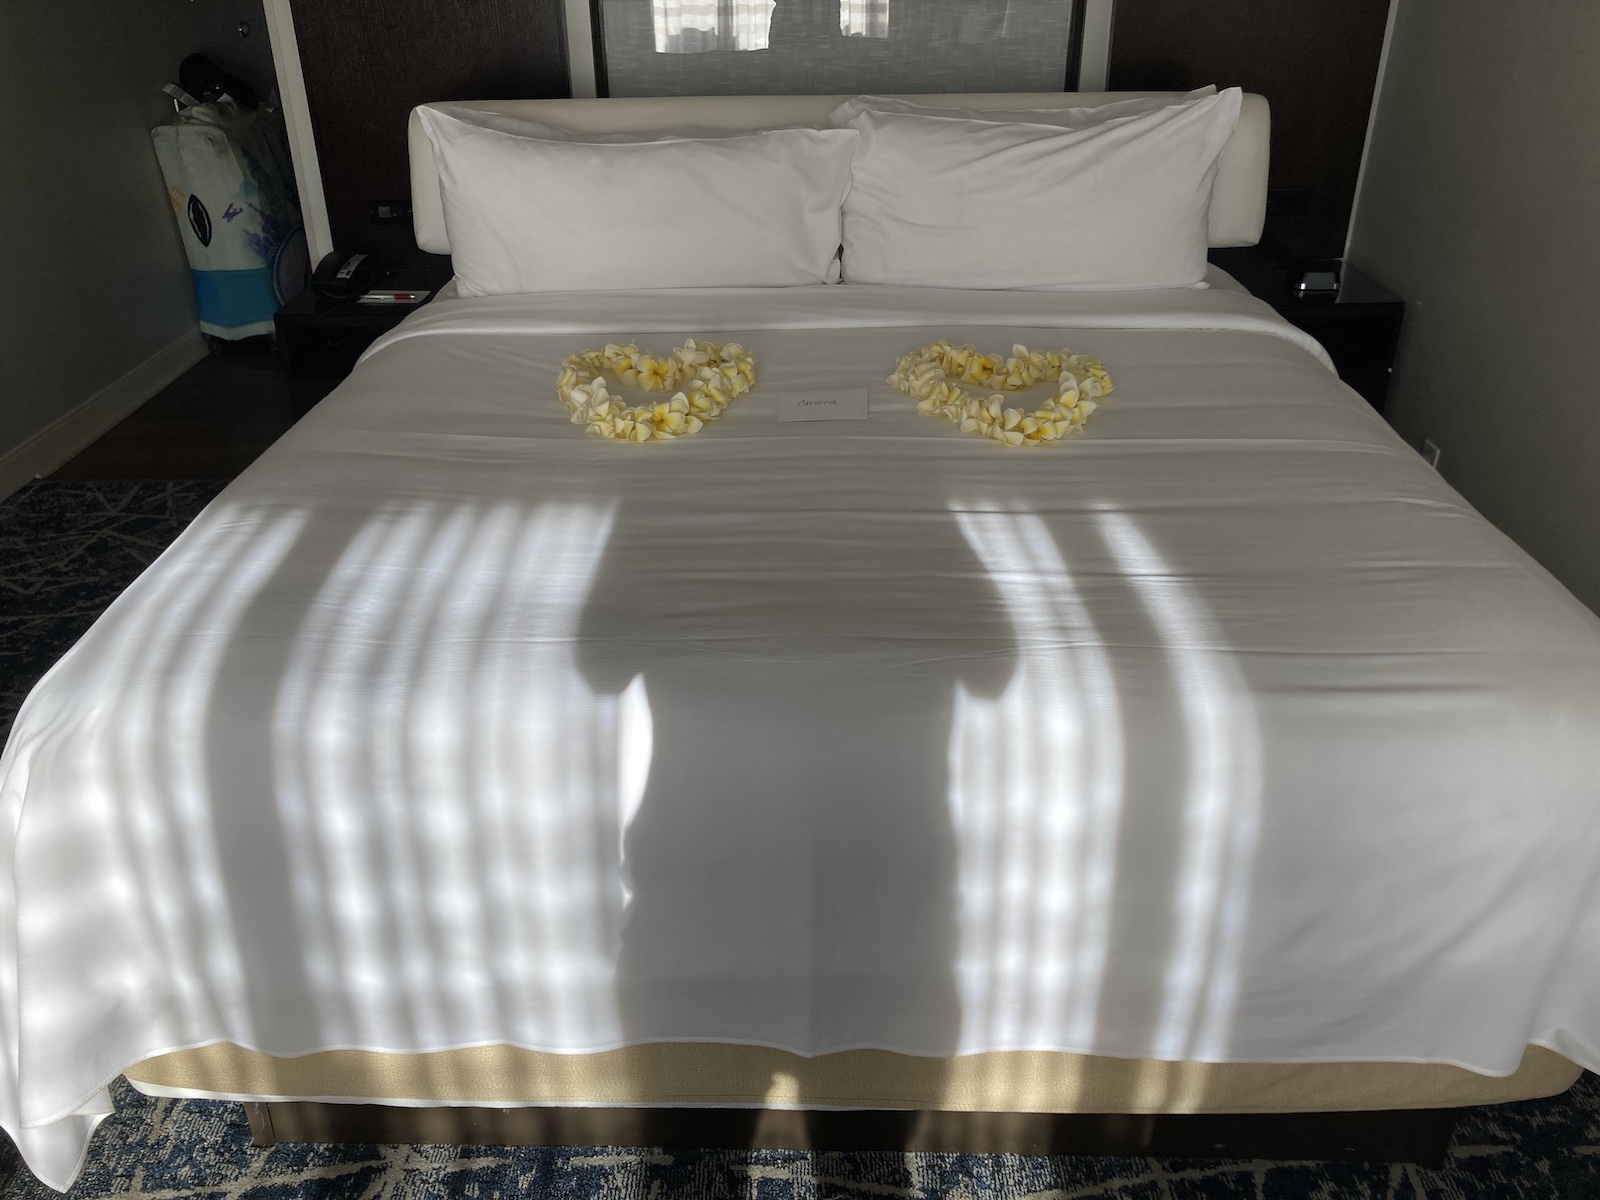 Photo of a bed with white sheets and pillows on it, plus two flower leis in the shape of hearts